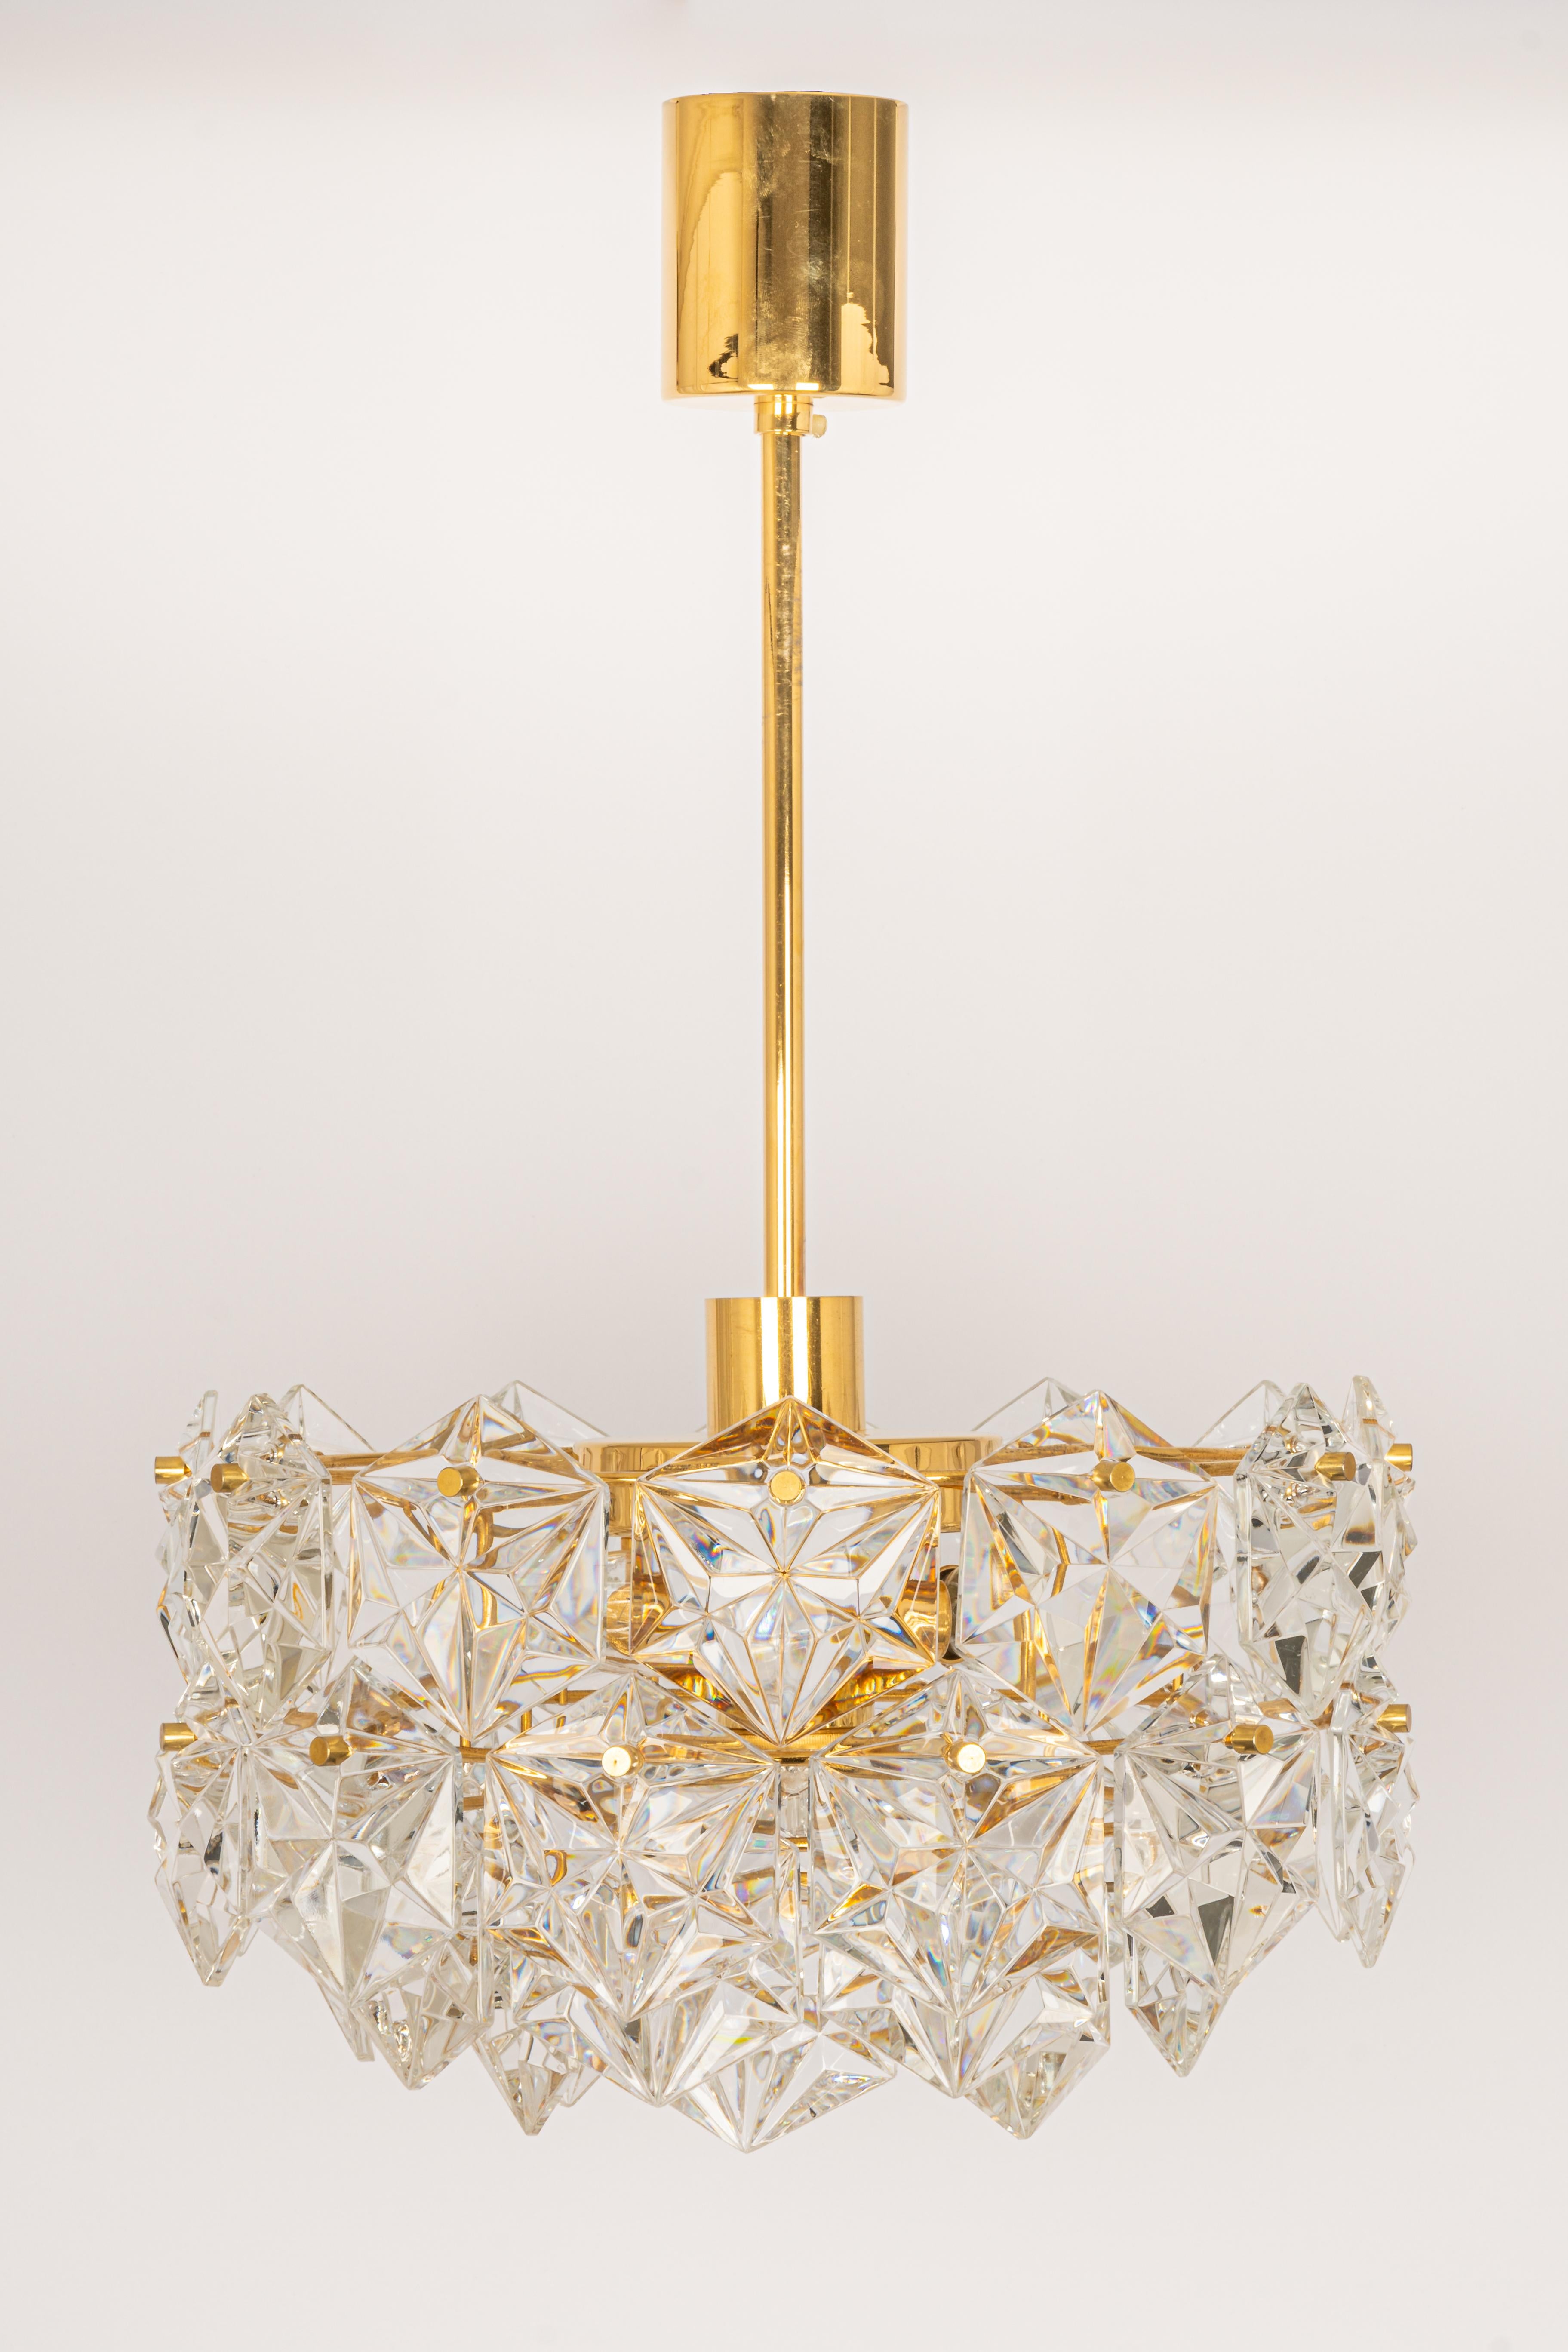 1 of 3 Petite Chandeliers, Brass and Crystal Glass by Kinkeldey, Germany, 1970s For Sale 3